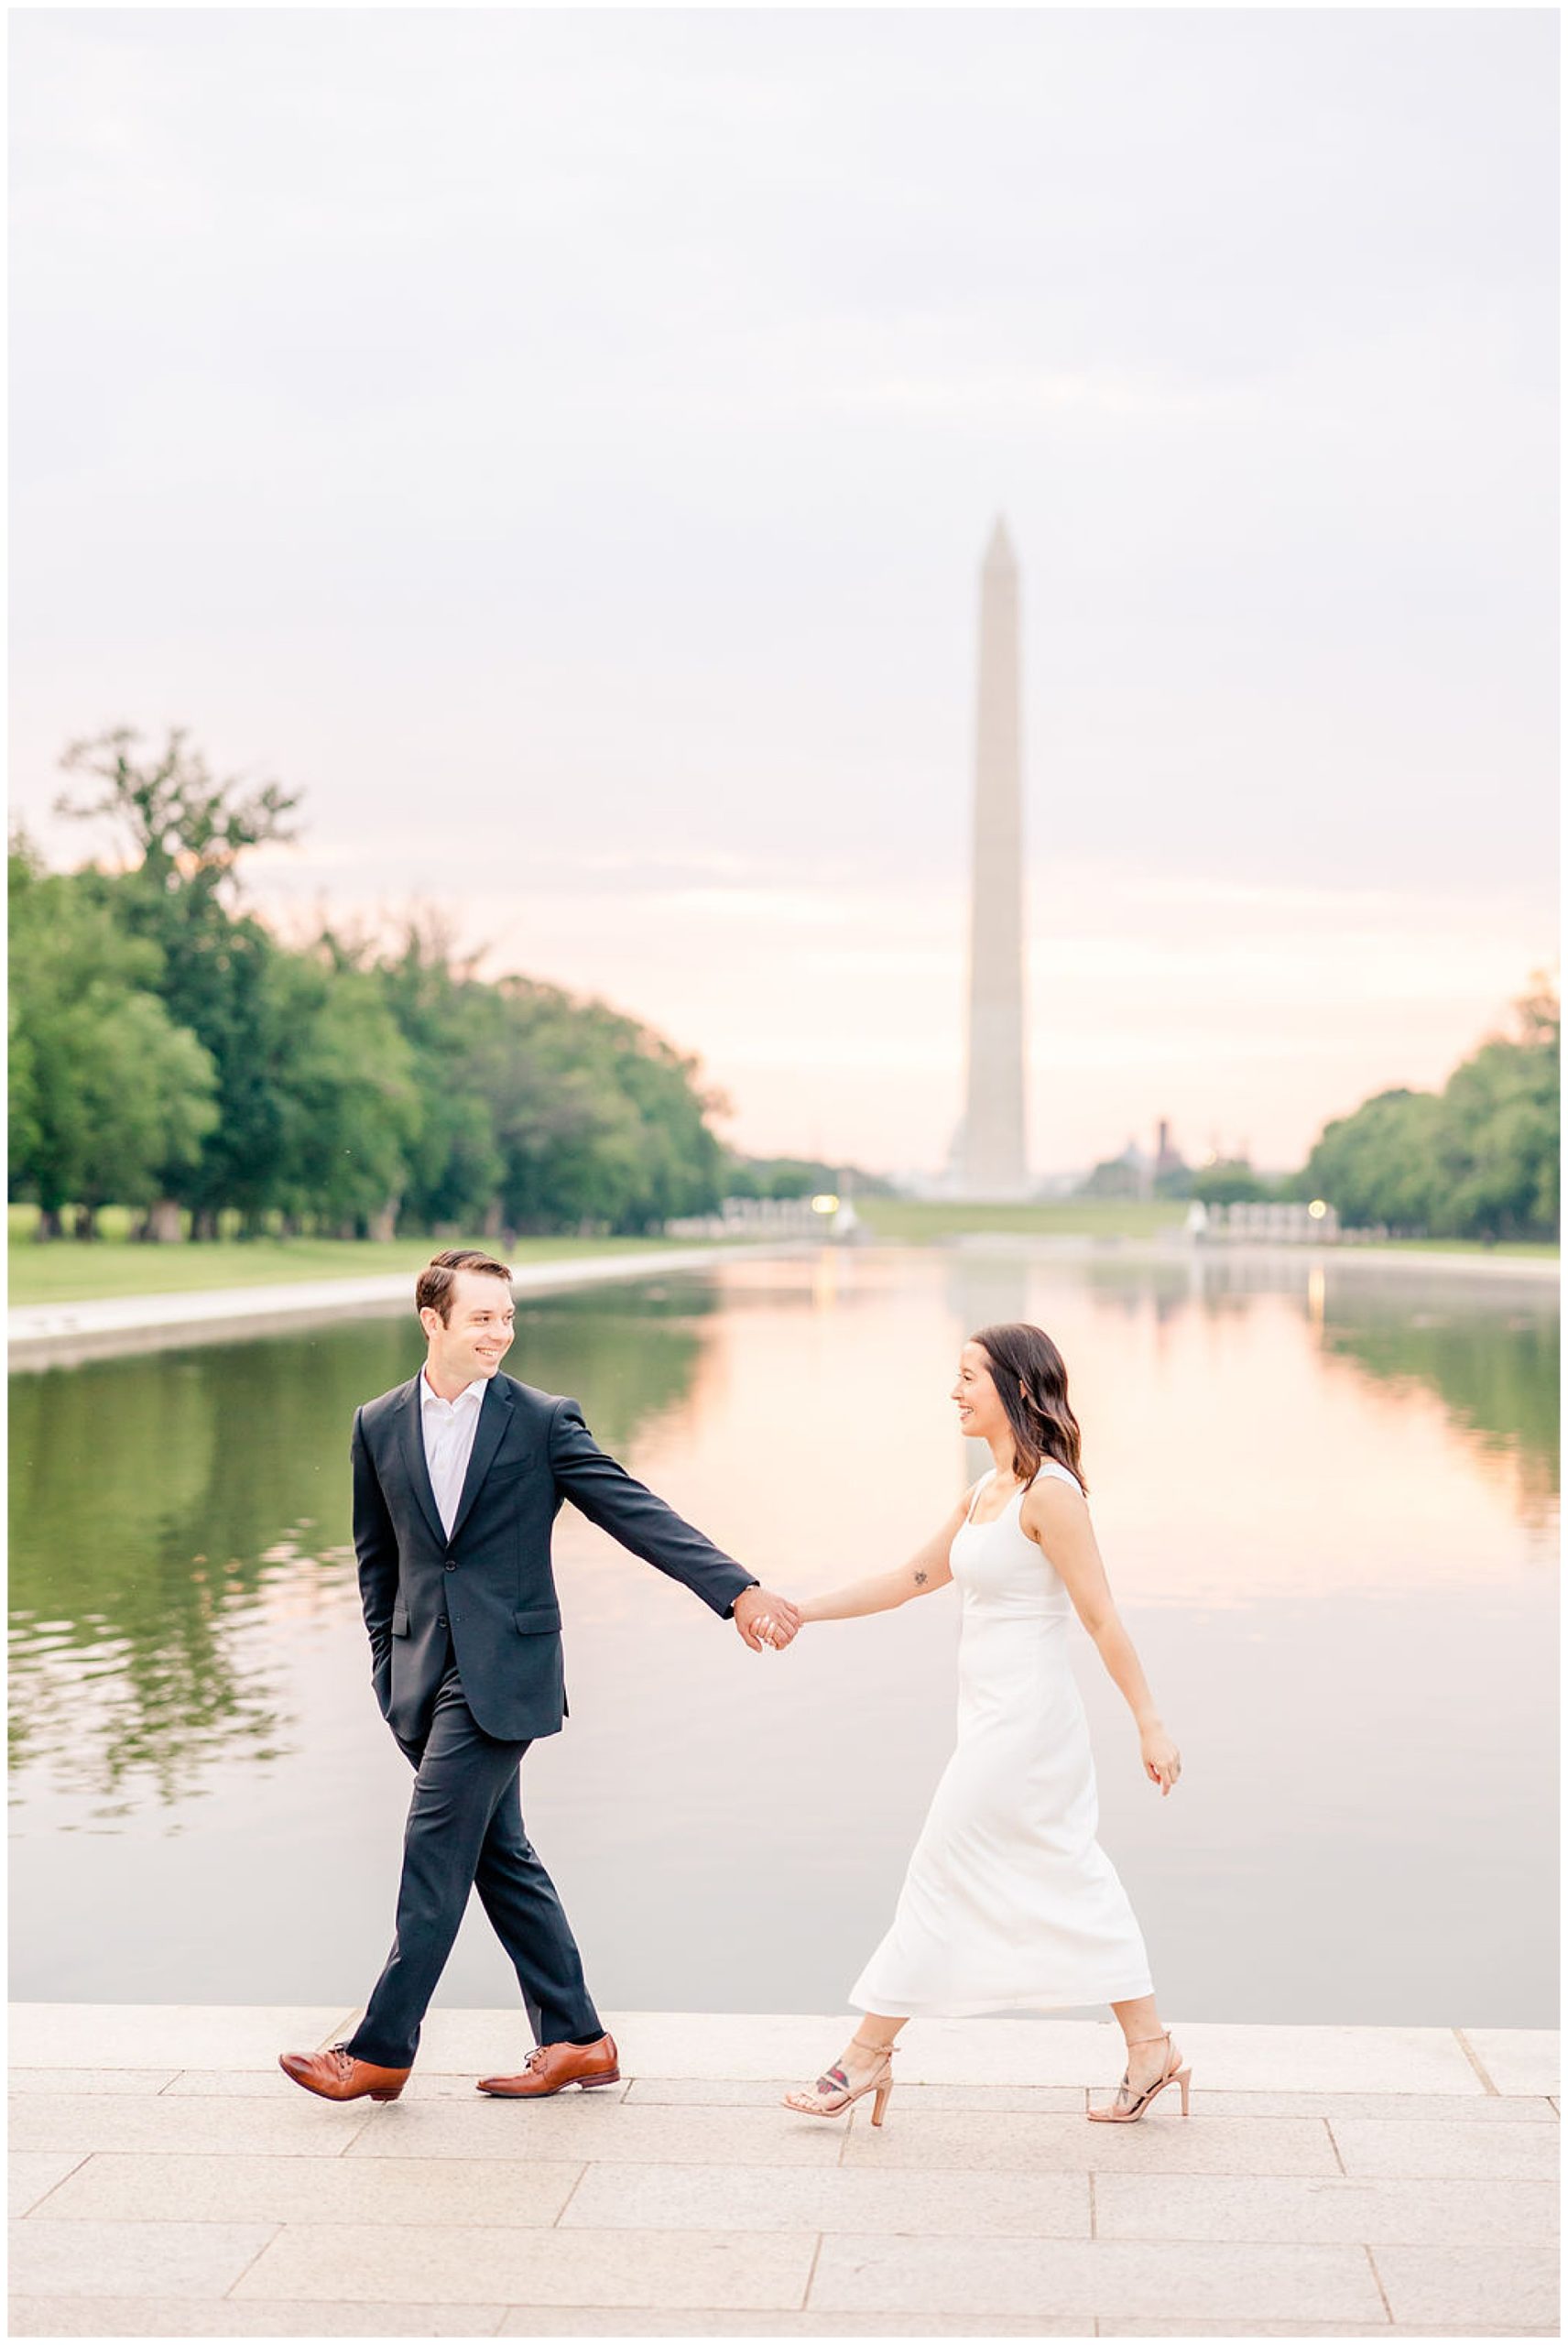 pink sunrise Lincoln Memorial engagement, DC engagement session, DC engagement photographer, formal DC engagement photos, DC elopement photographer, DC wedding photographer, classic DC engagement photos, luxury DC engagement photographer, Rachel E.H. Photography, couple holding hands from distance, couple walking along water, man looking at fiancé